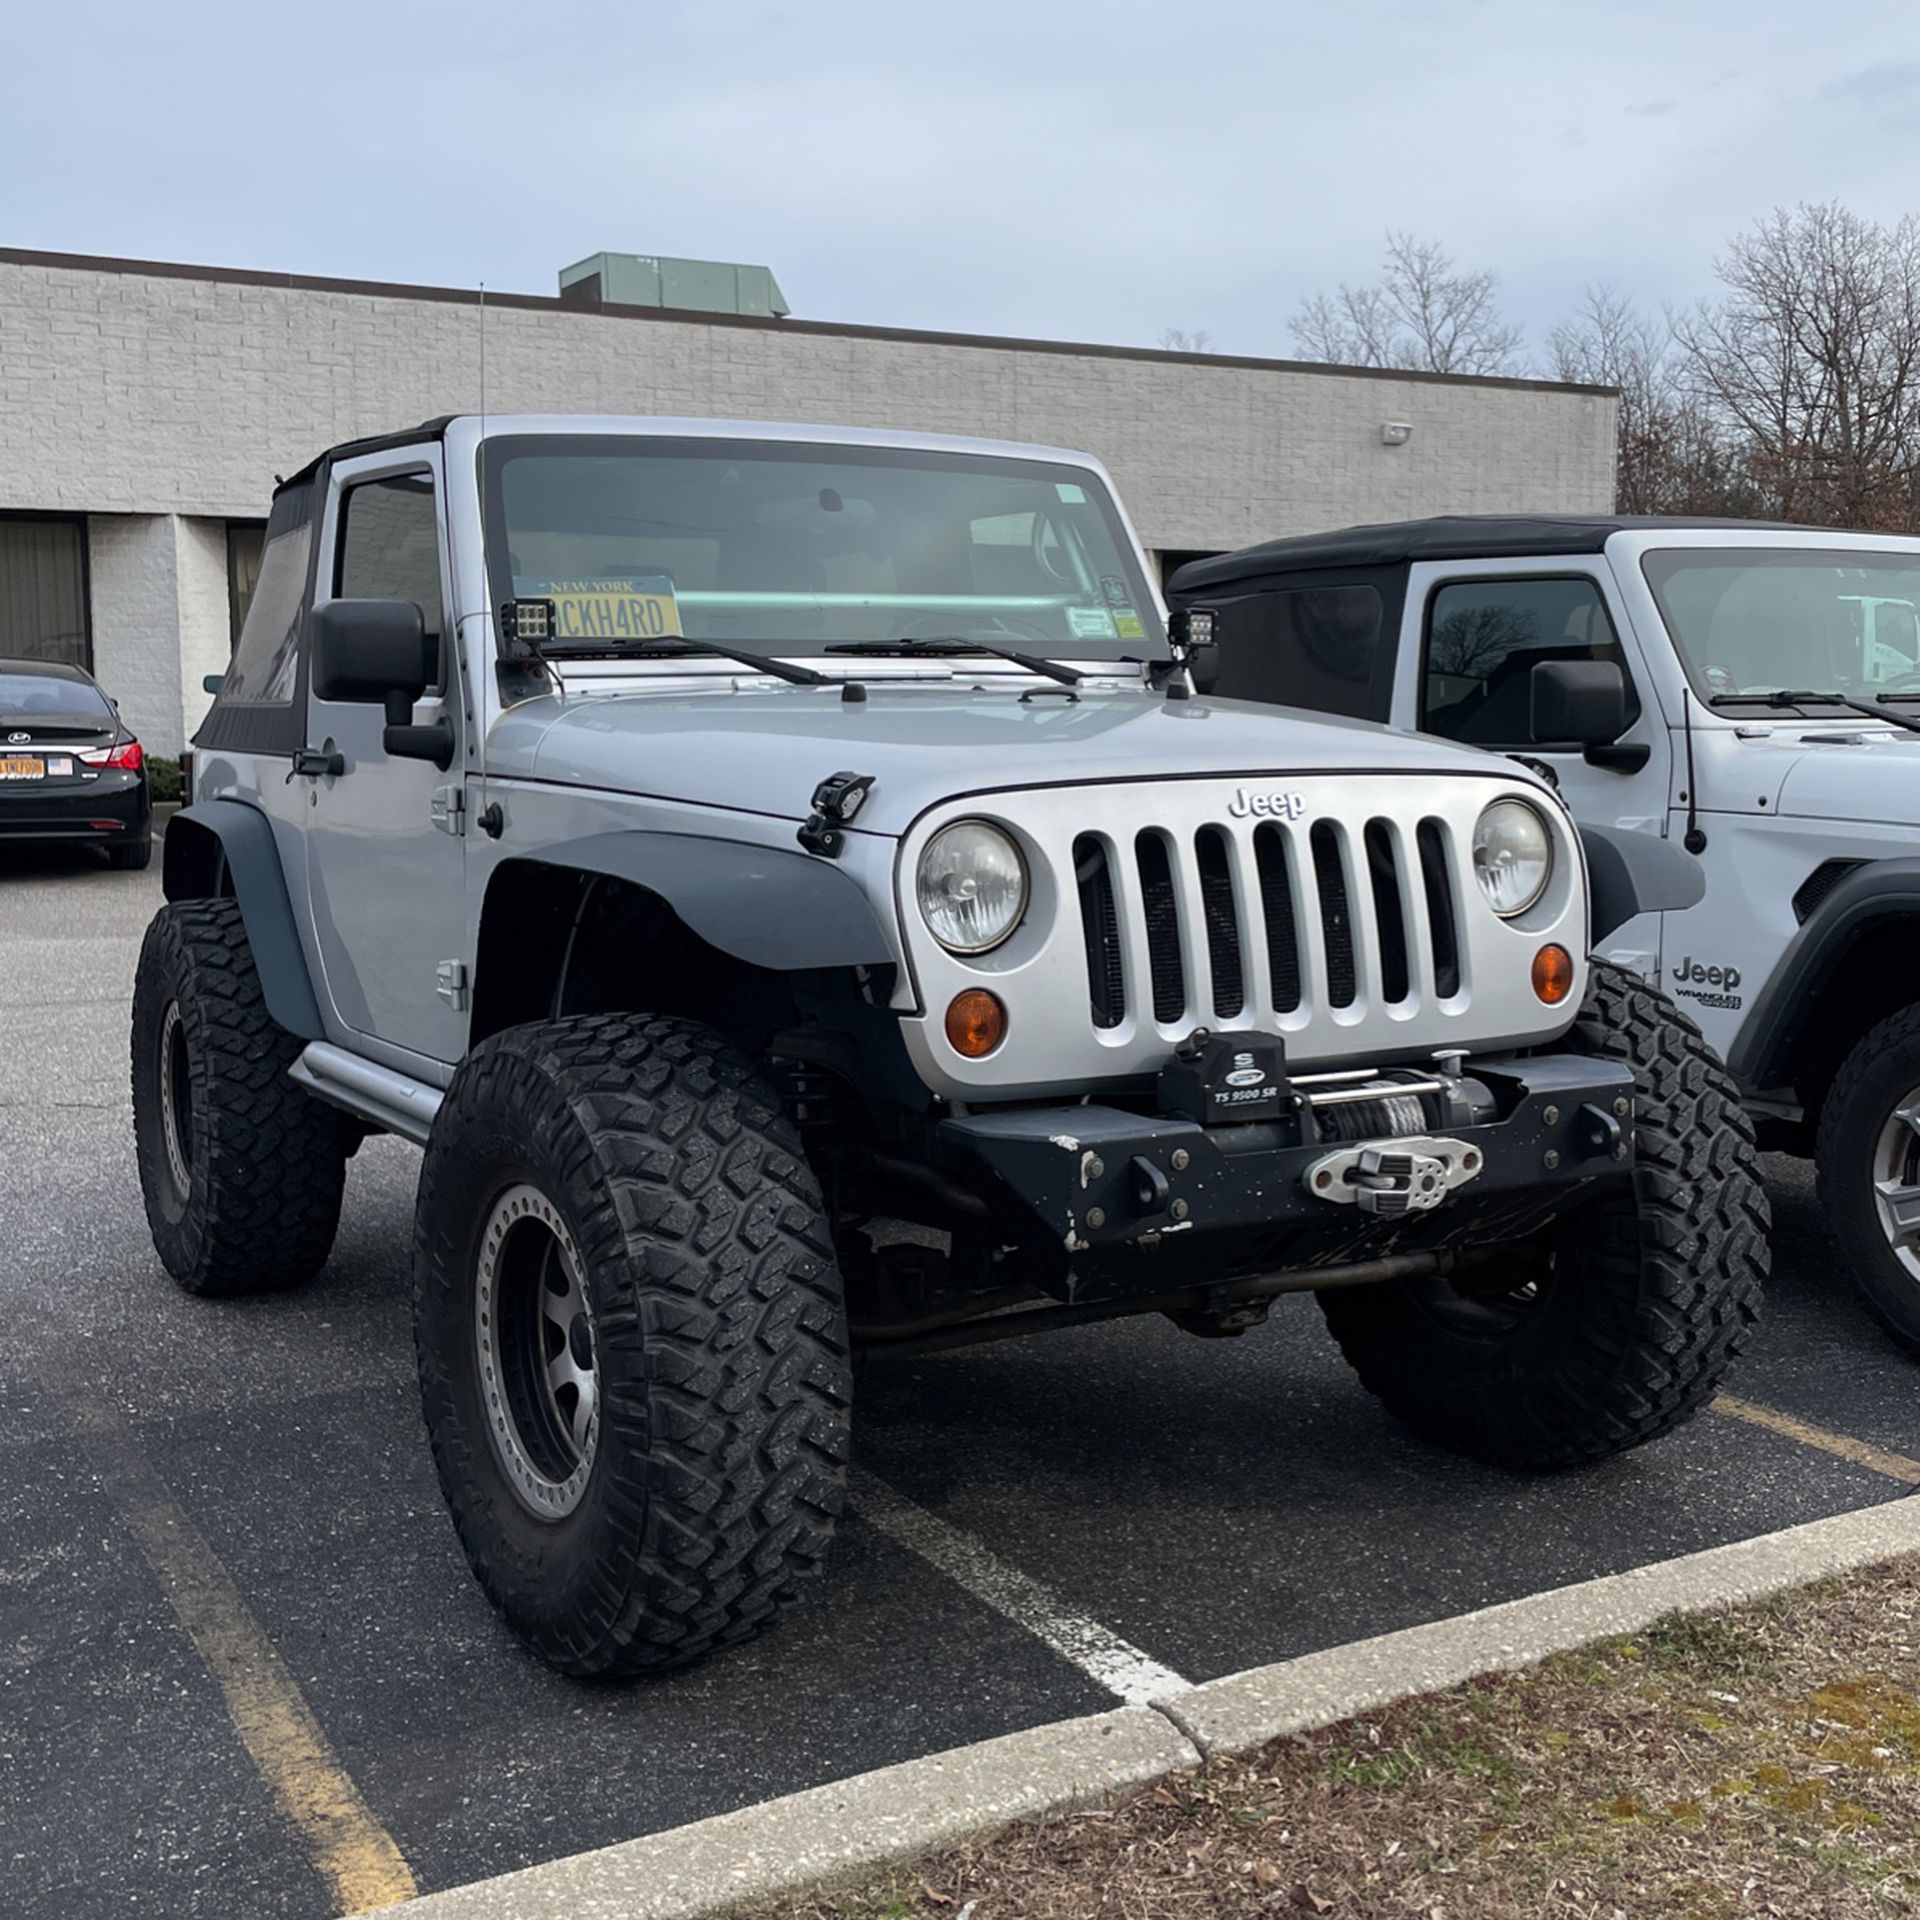 2009 Jeep Wrangler for Sale in Ronkonkoma, NY - OfferUp